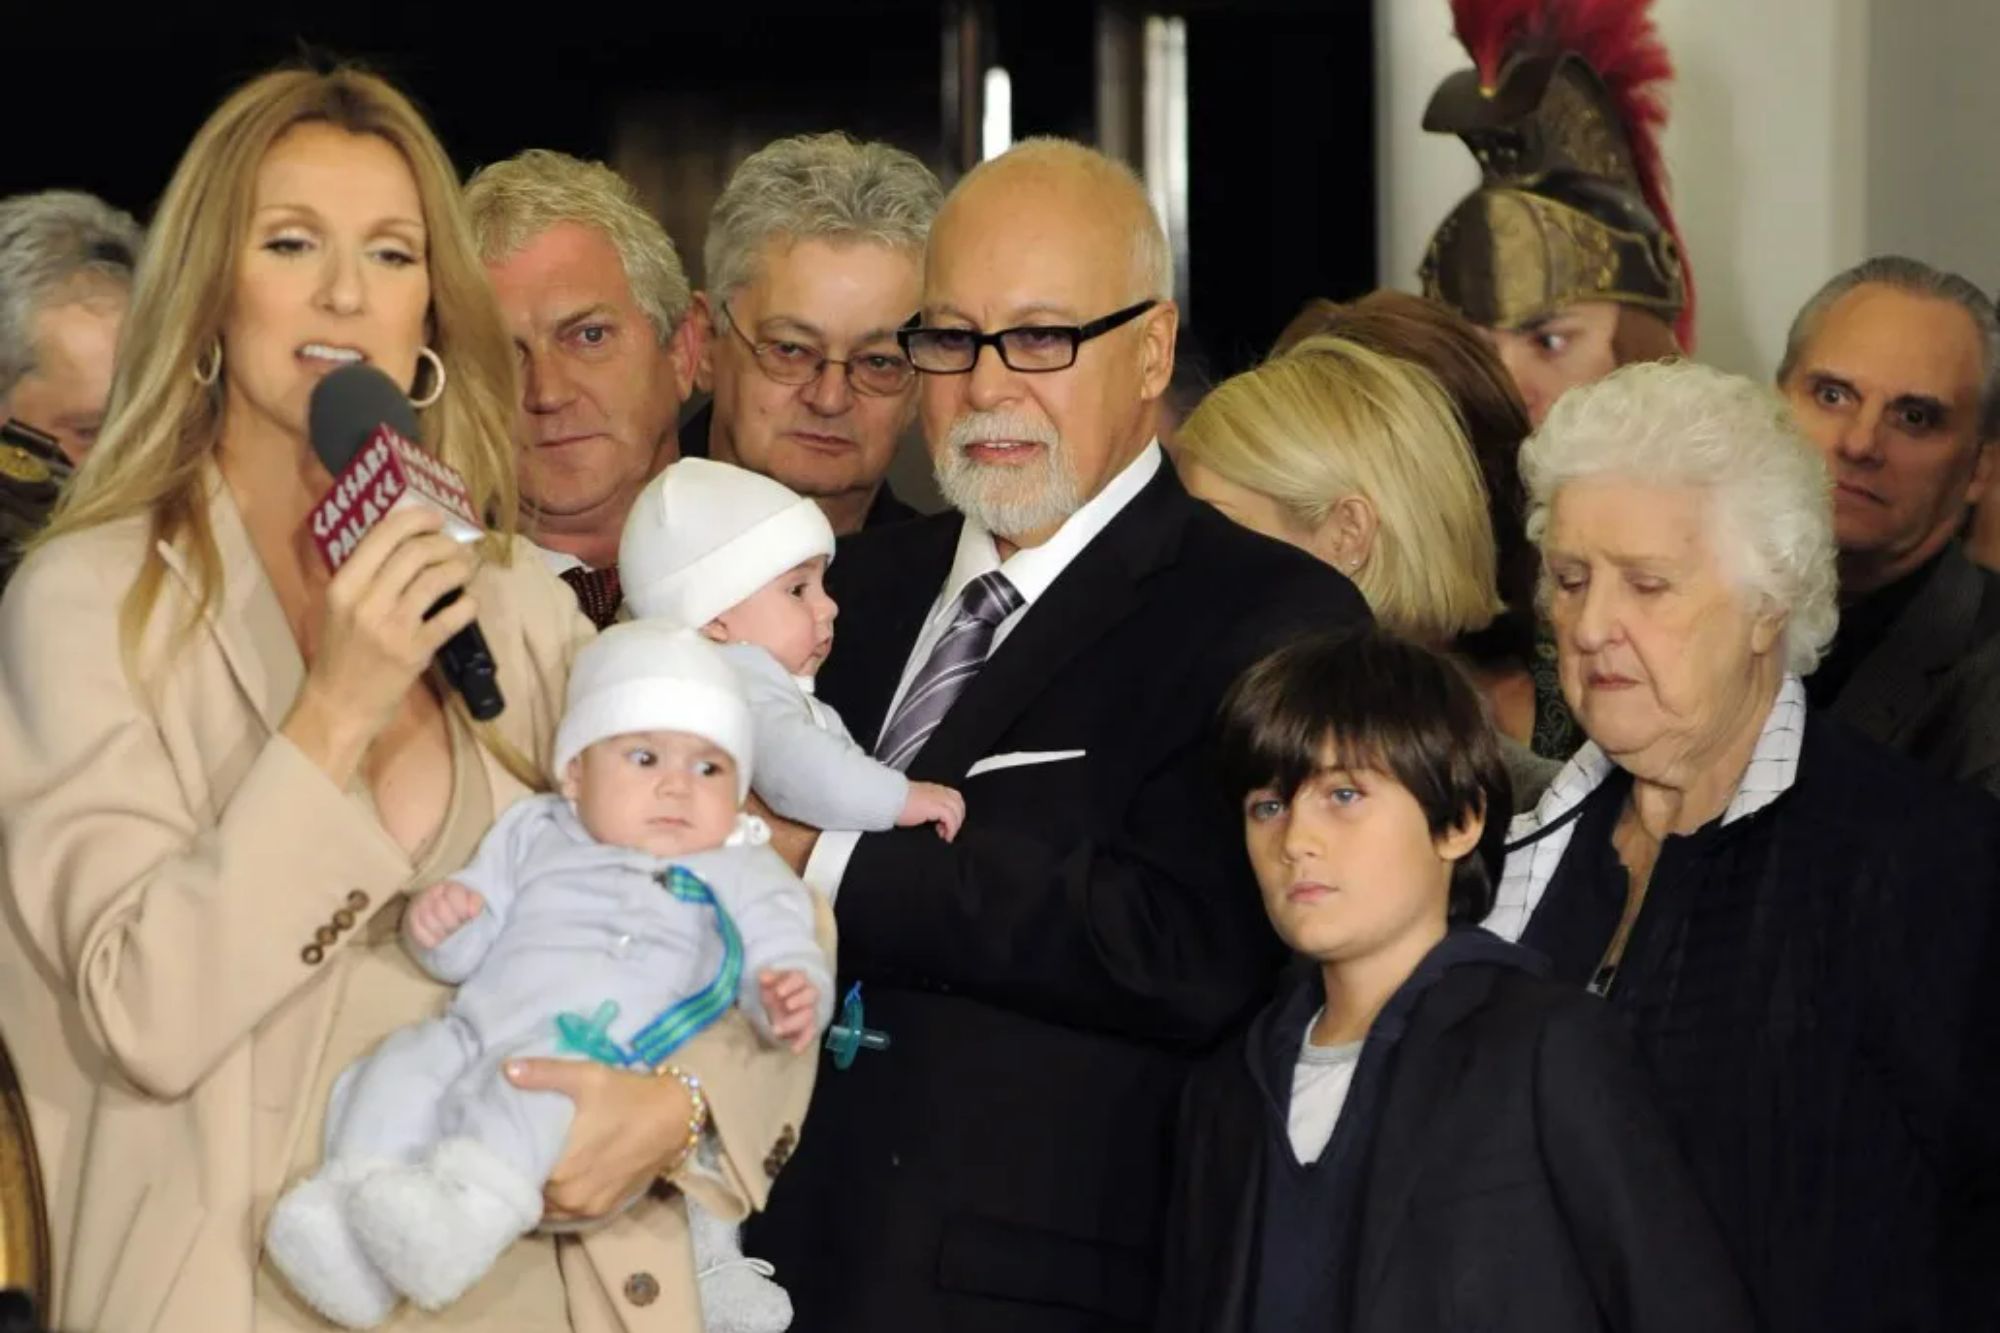 Celine has three sons with her late husband